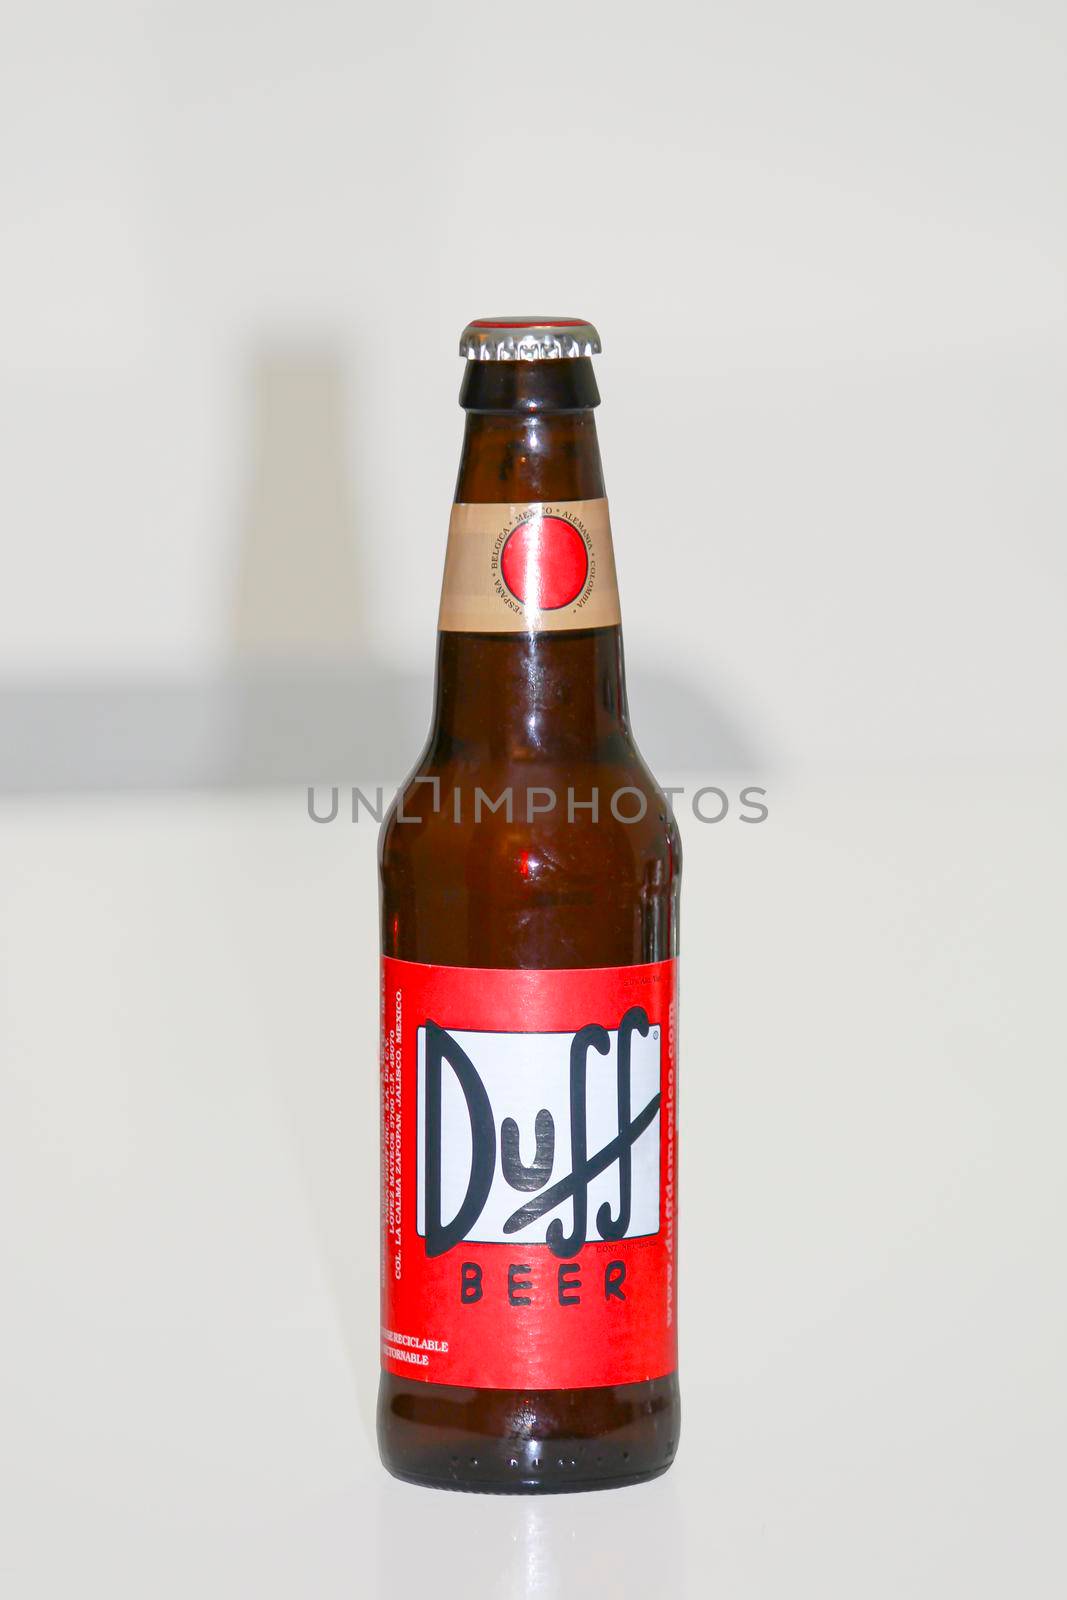 Calgary Alberta, Canada. Feb 15, 2021. A bottle of Duff Beer on a clear background by oasisamuel